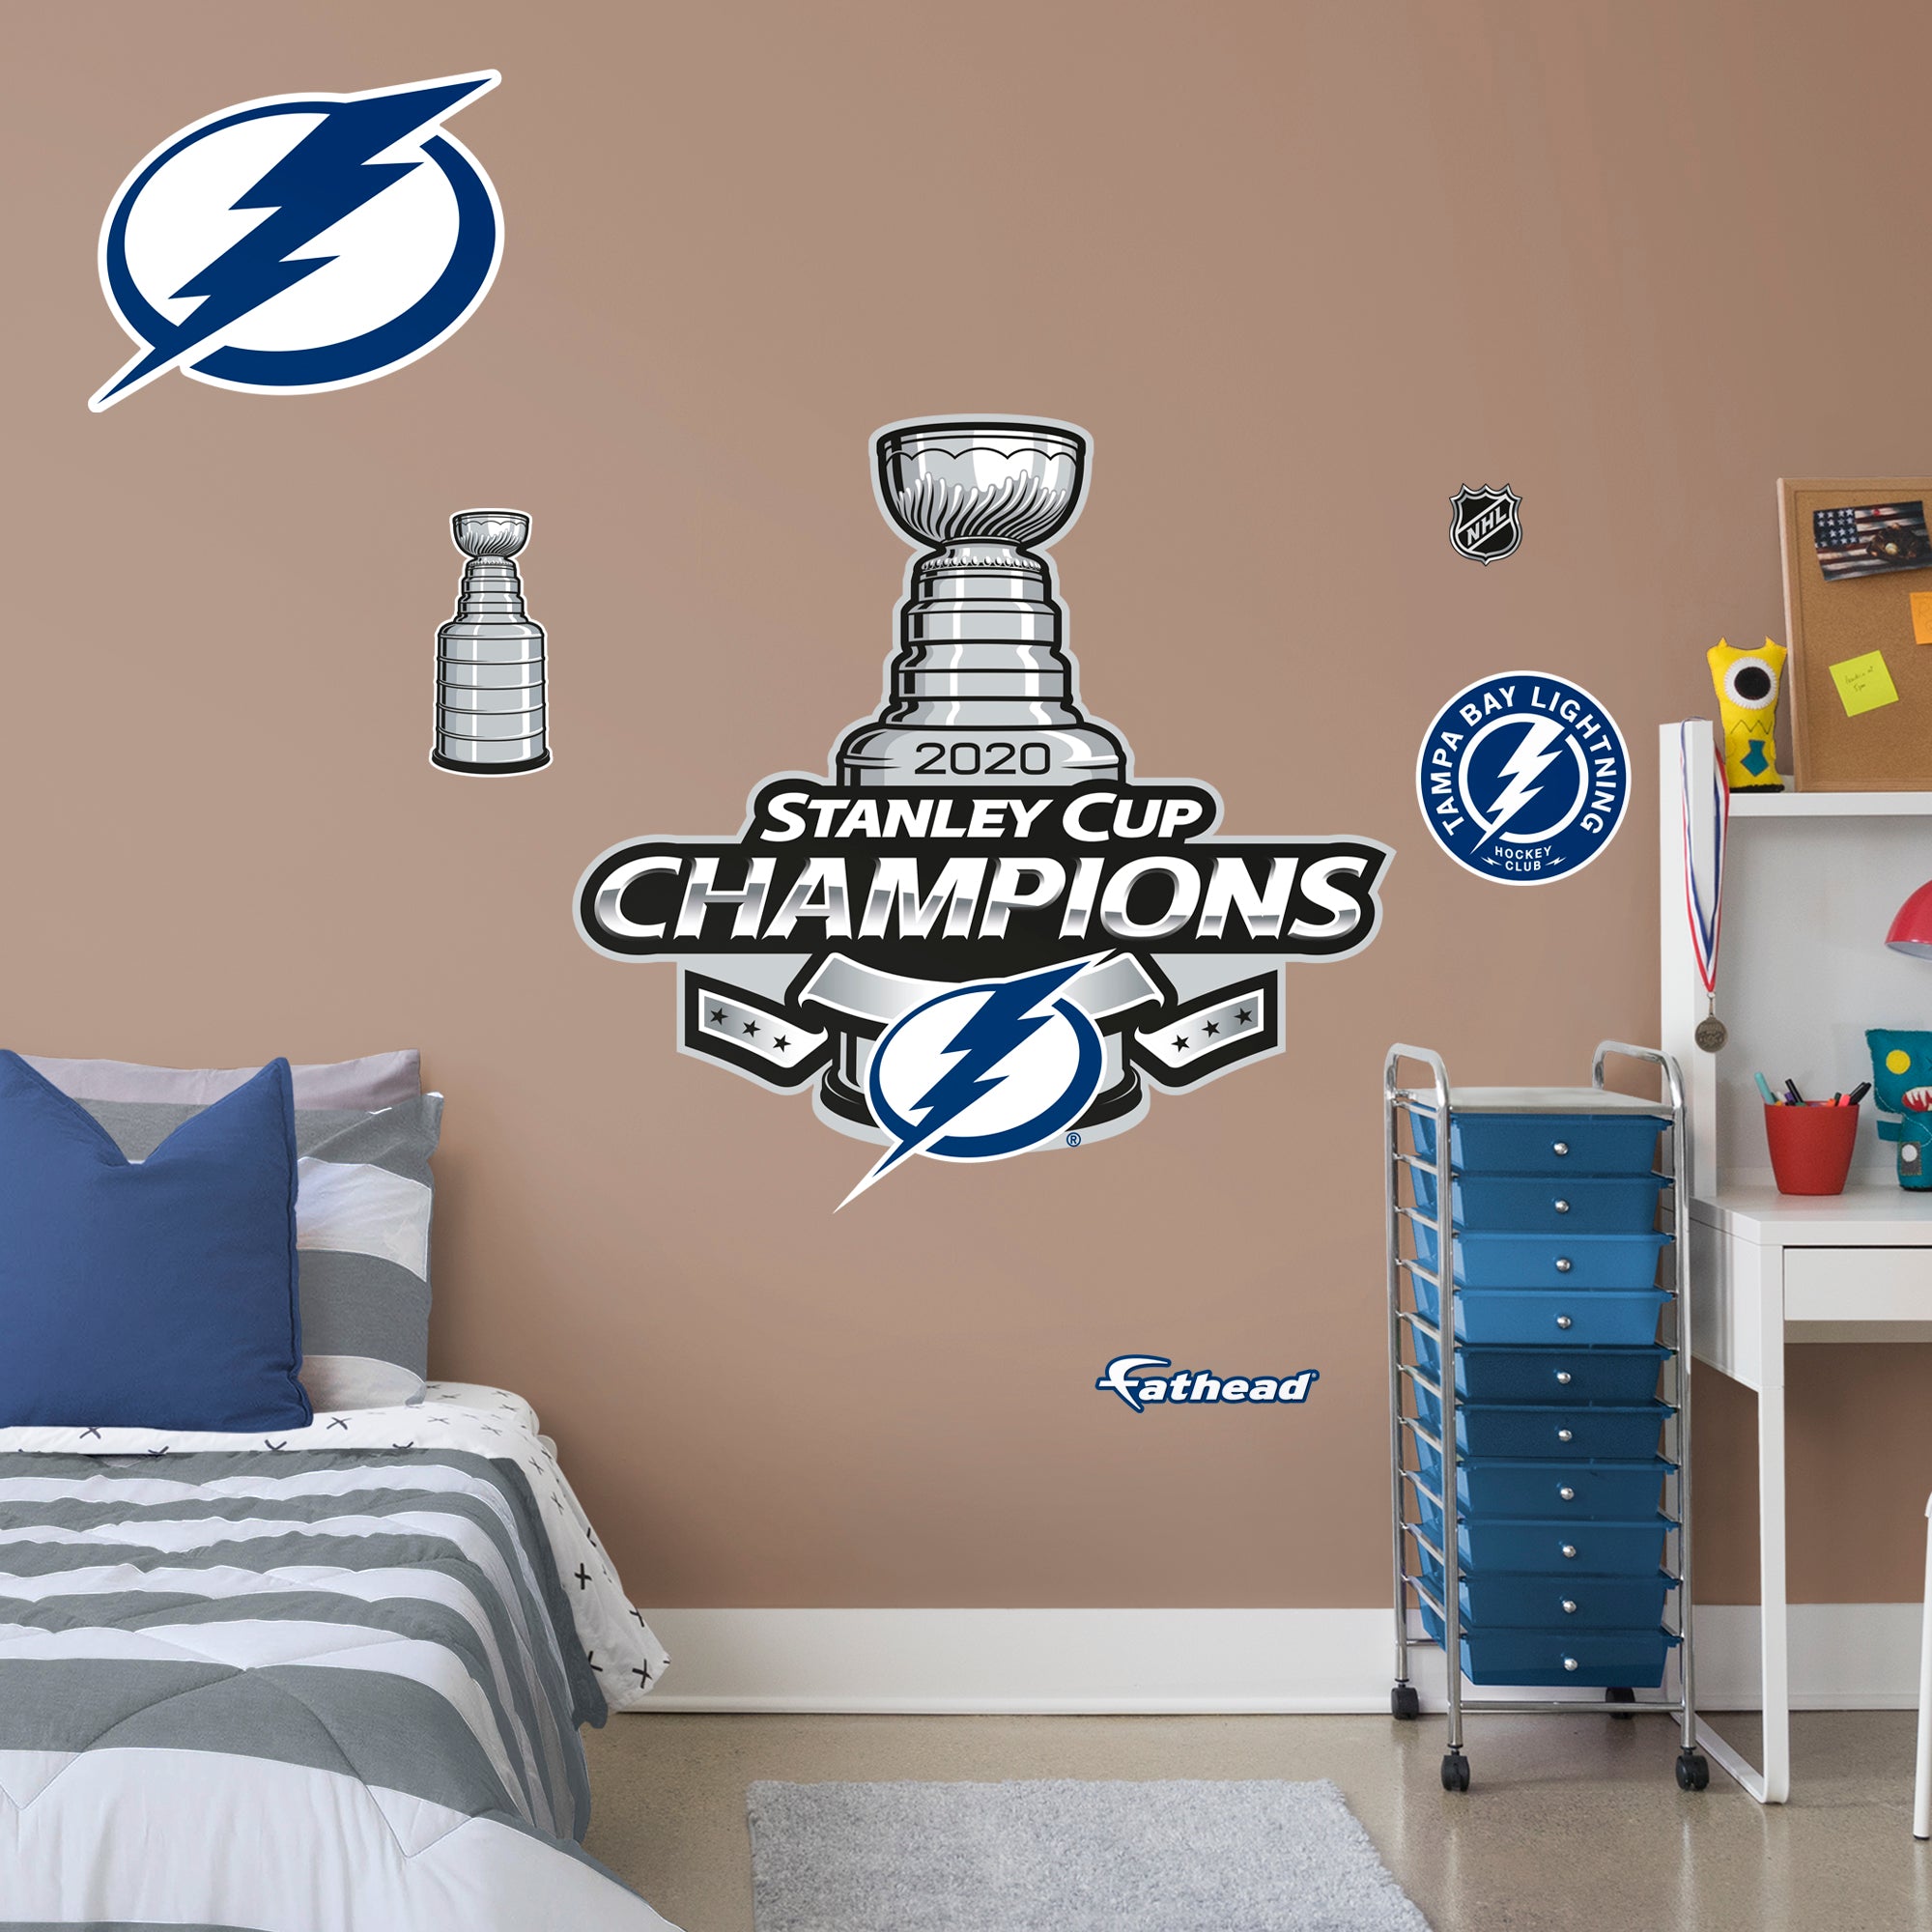 Tampa Bay Lightning: Stanley Championship Banner - Officially Licensed Giant Cup (43.5W" x 42"H) by Fathead | Vinyl